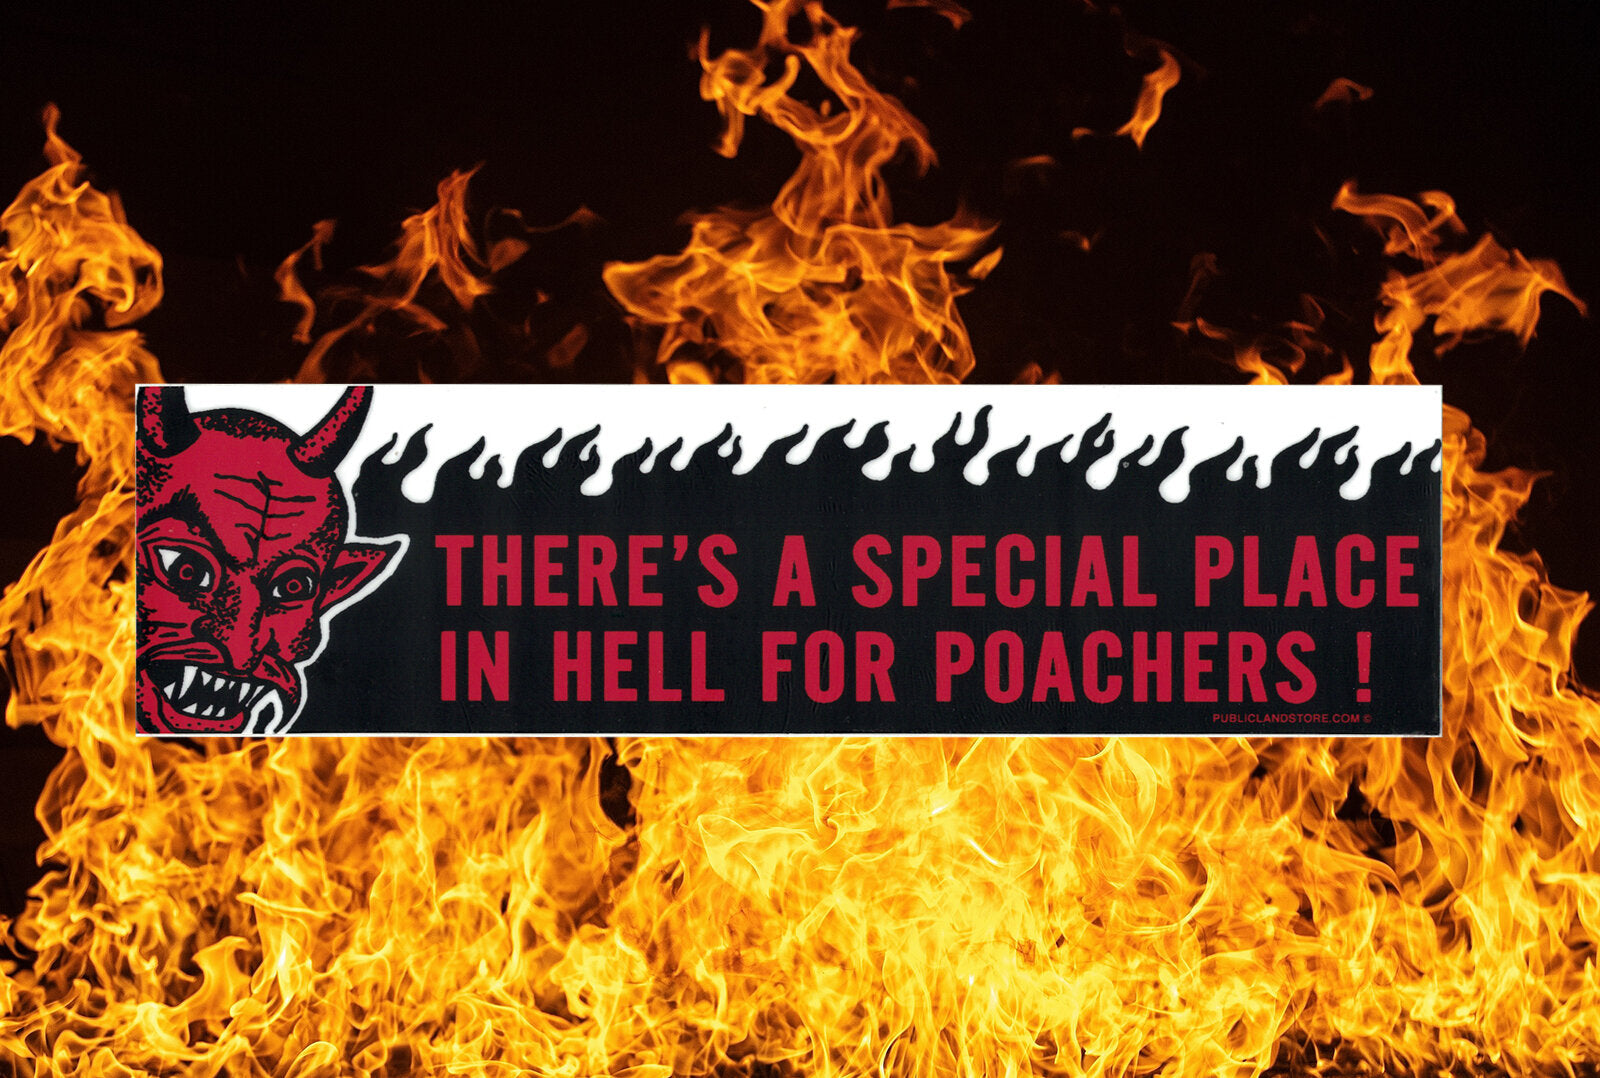 There's A Special Place In Hell For Poachers! - Bumper Sticker